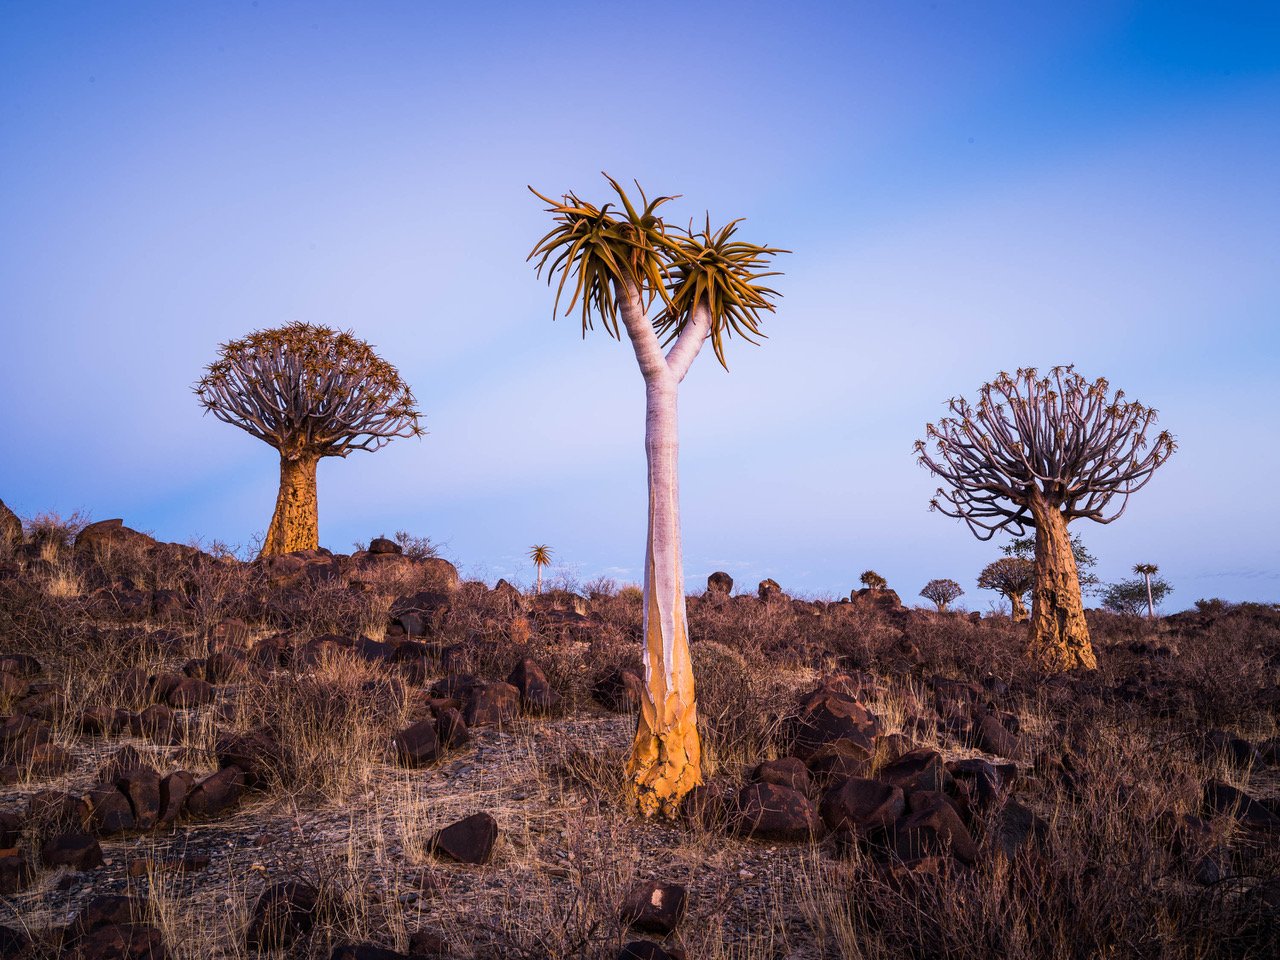 Weird standing trees on a bushy area, Namibia #18, Africa